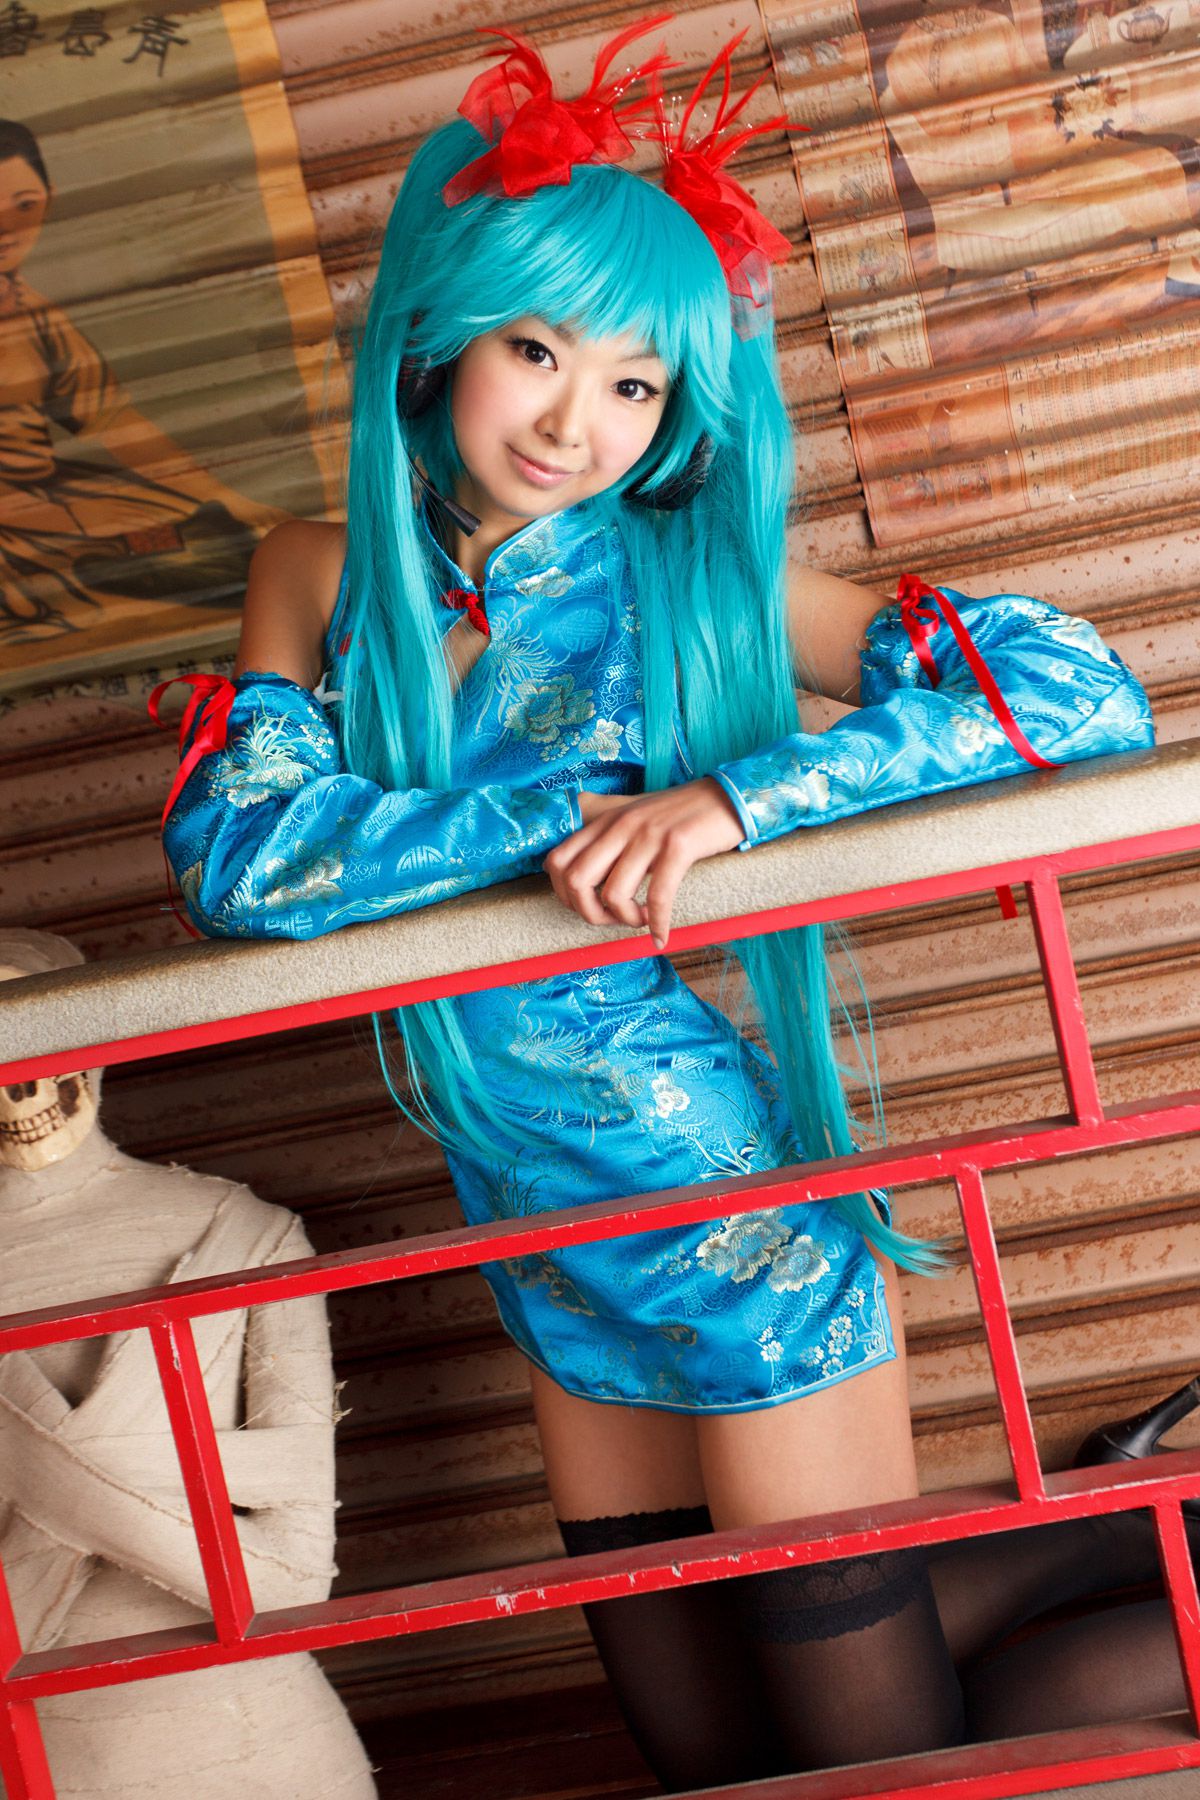 taotuhome[Cosplay] Necoco as Hatsune Miku from Vocaloid 套图第52张